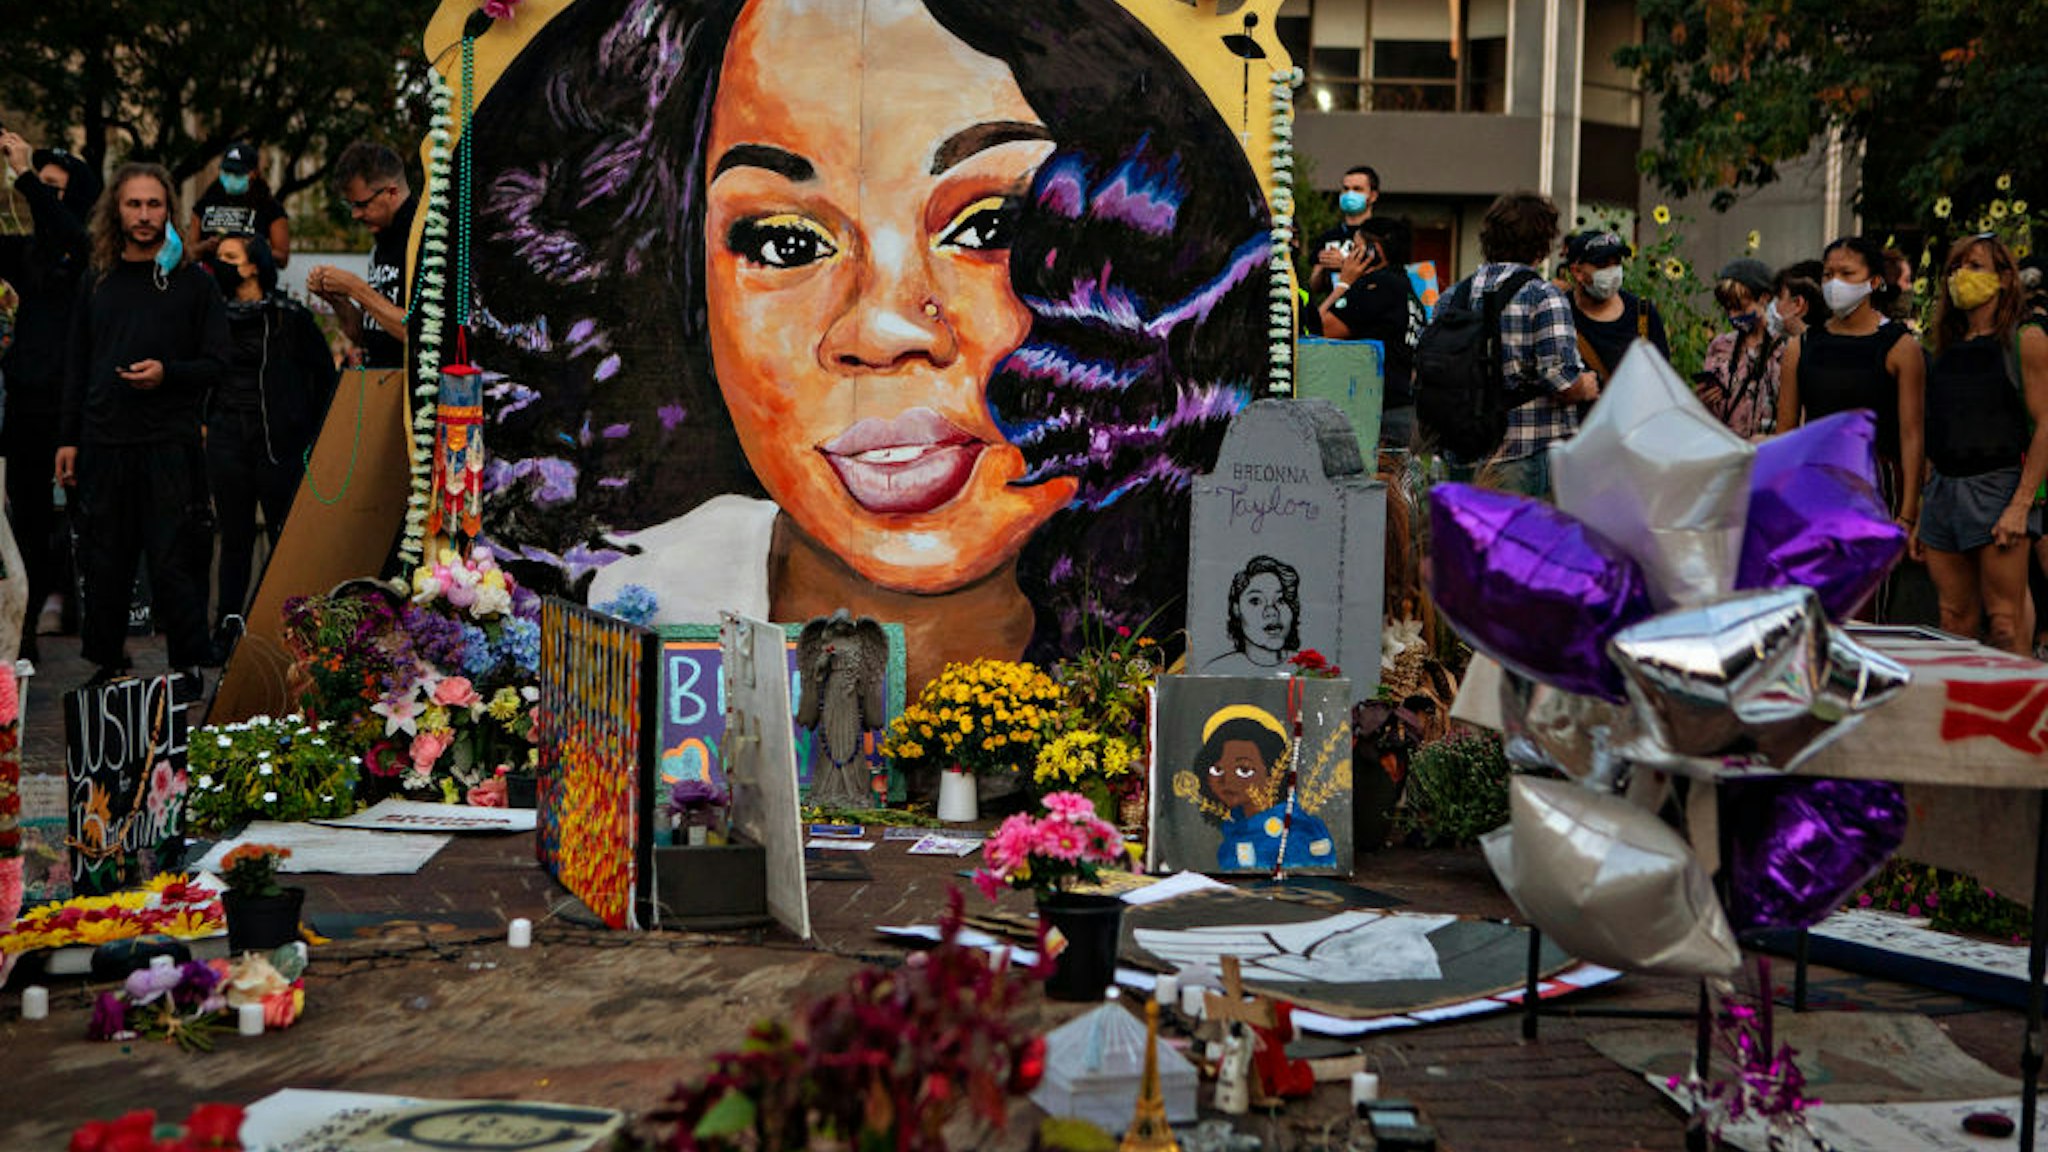 People gather at Breonna Taylors make shift memorial in Injustice Square Park in downtown Louisville on Saturday, Sept. 26, 2020 in Louisville, KY.